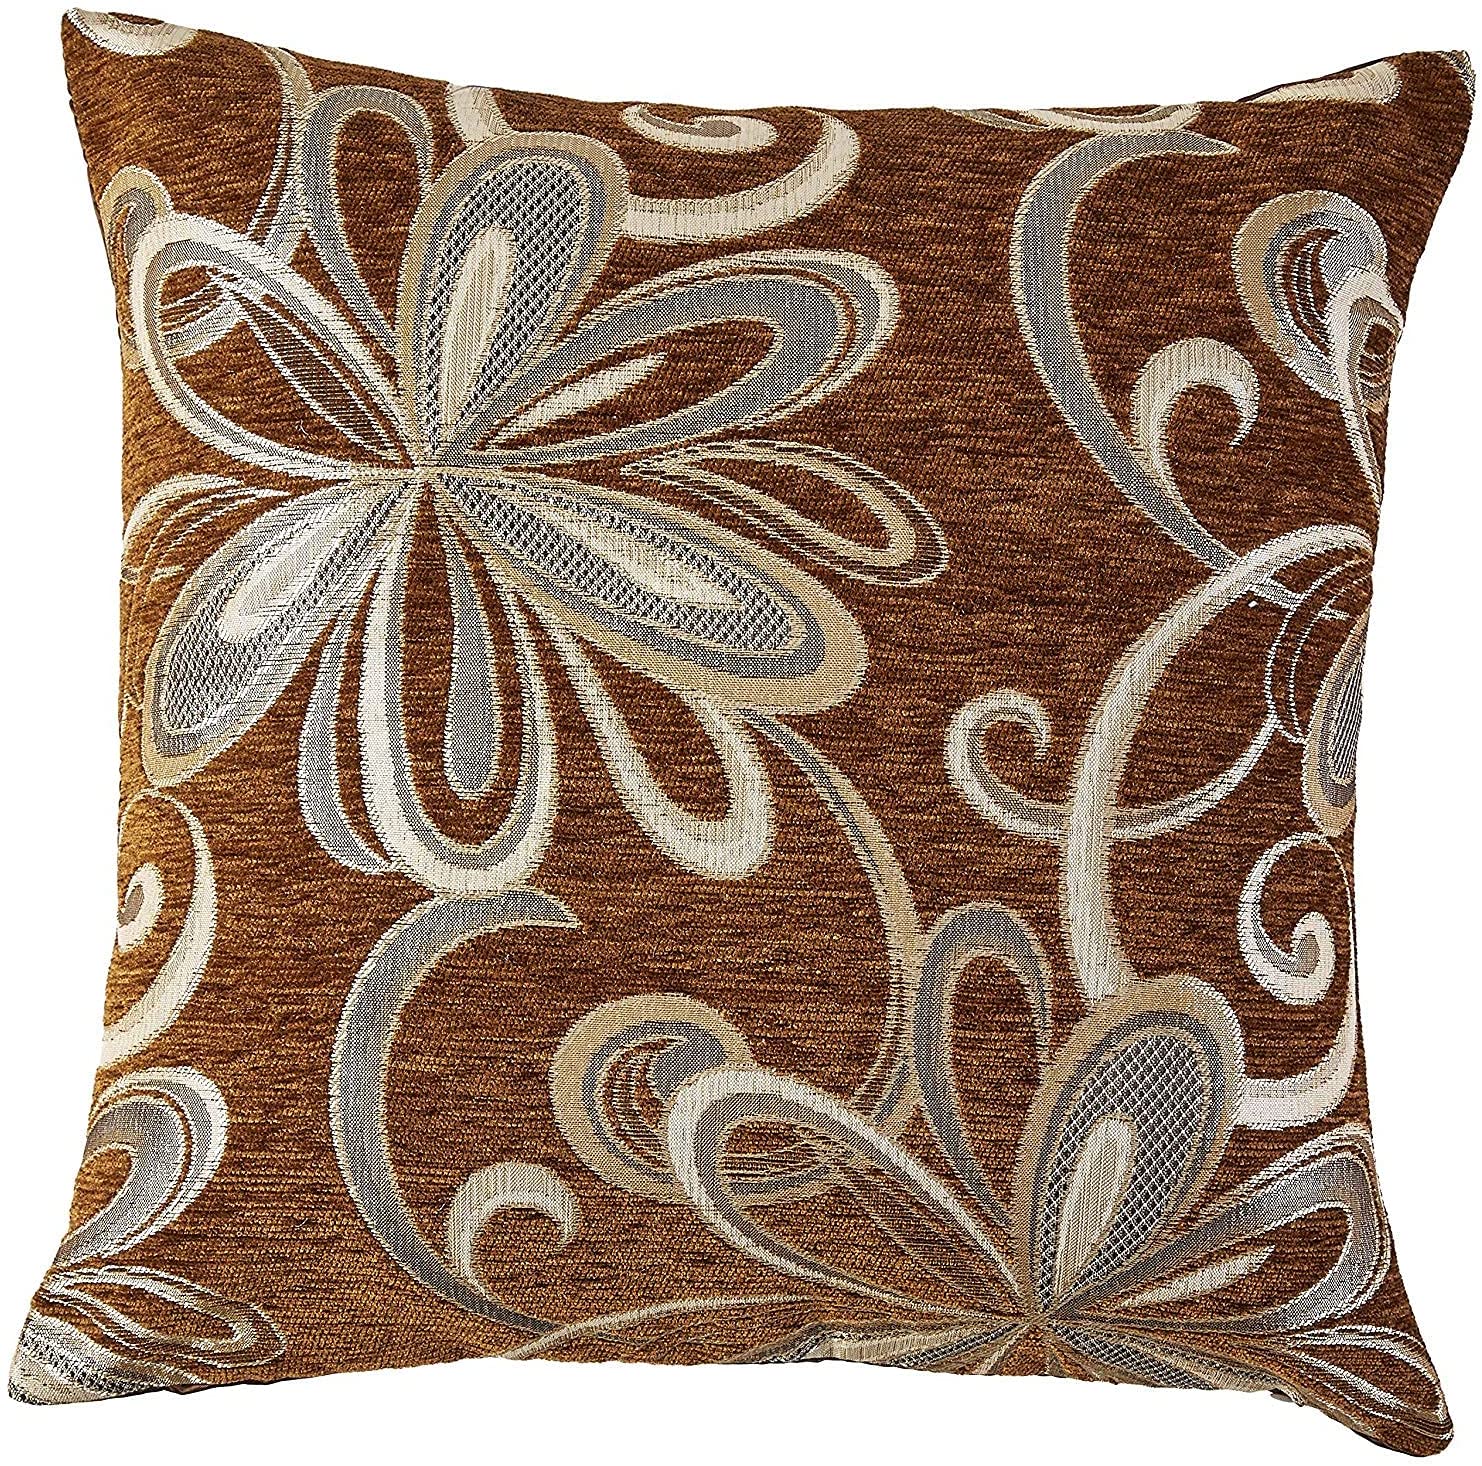 Chateau Chenille Vintage Floral Design Decorative Cushion Cover 18 x 18 Inches